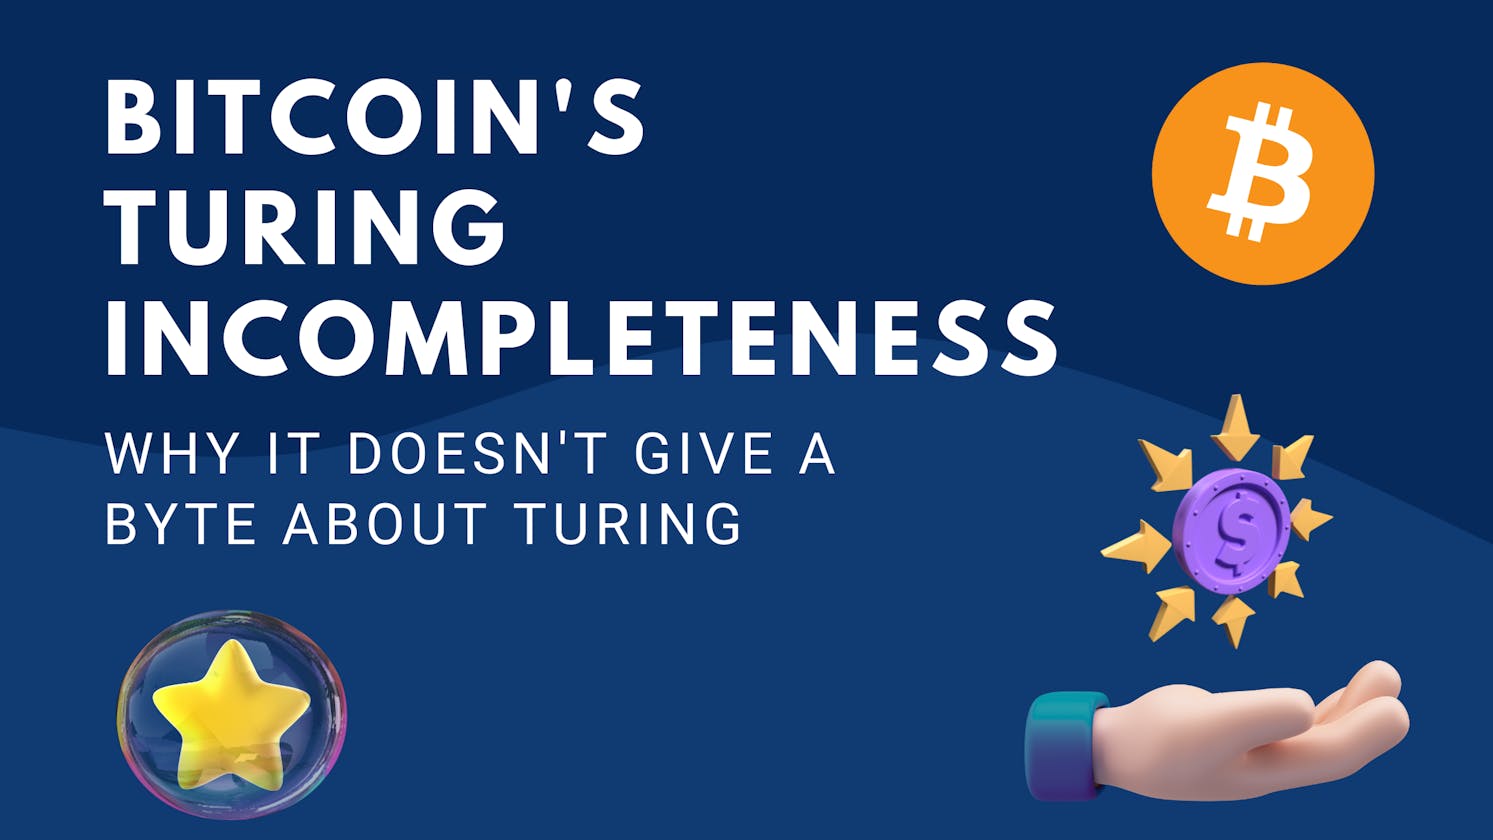 Bitcoin's Turing Incompleteness